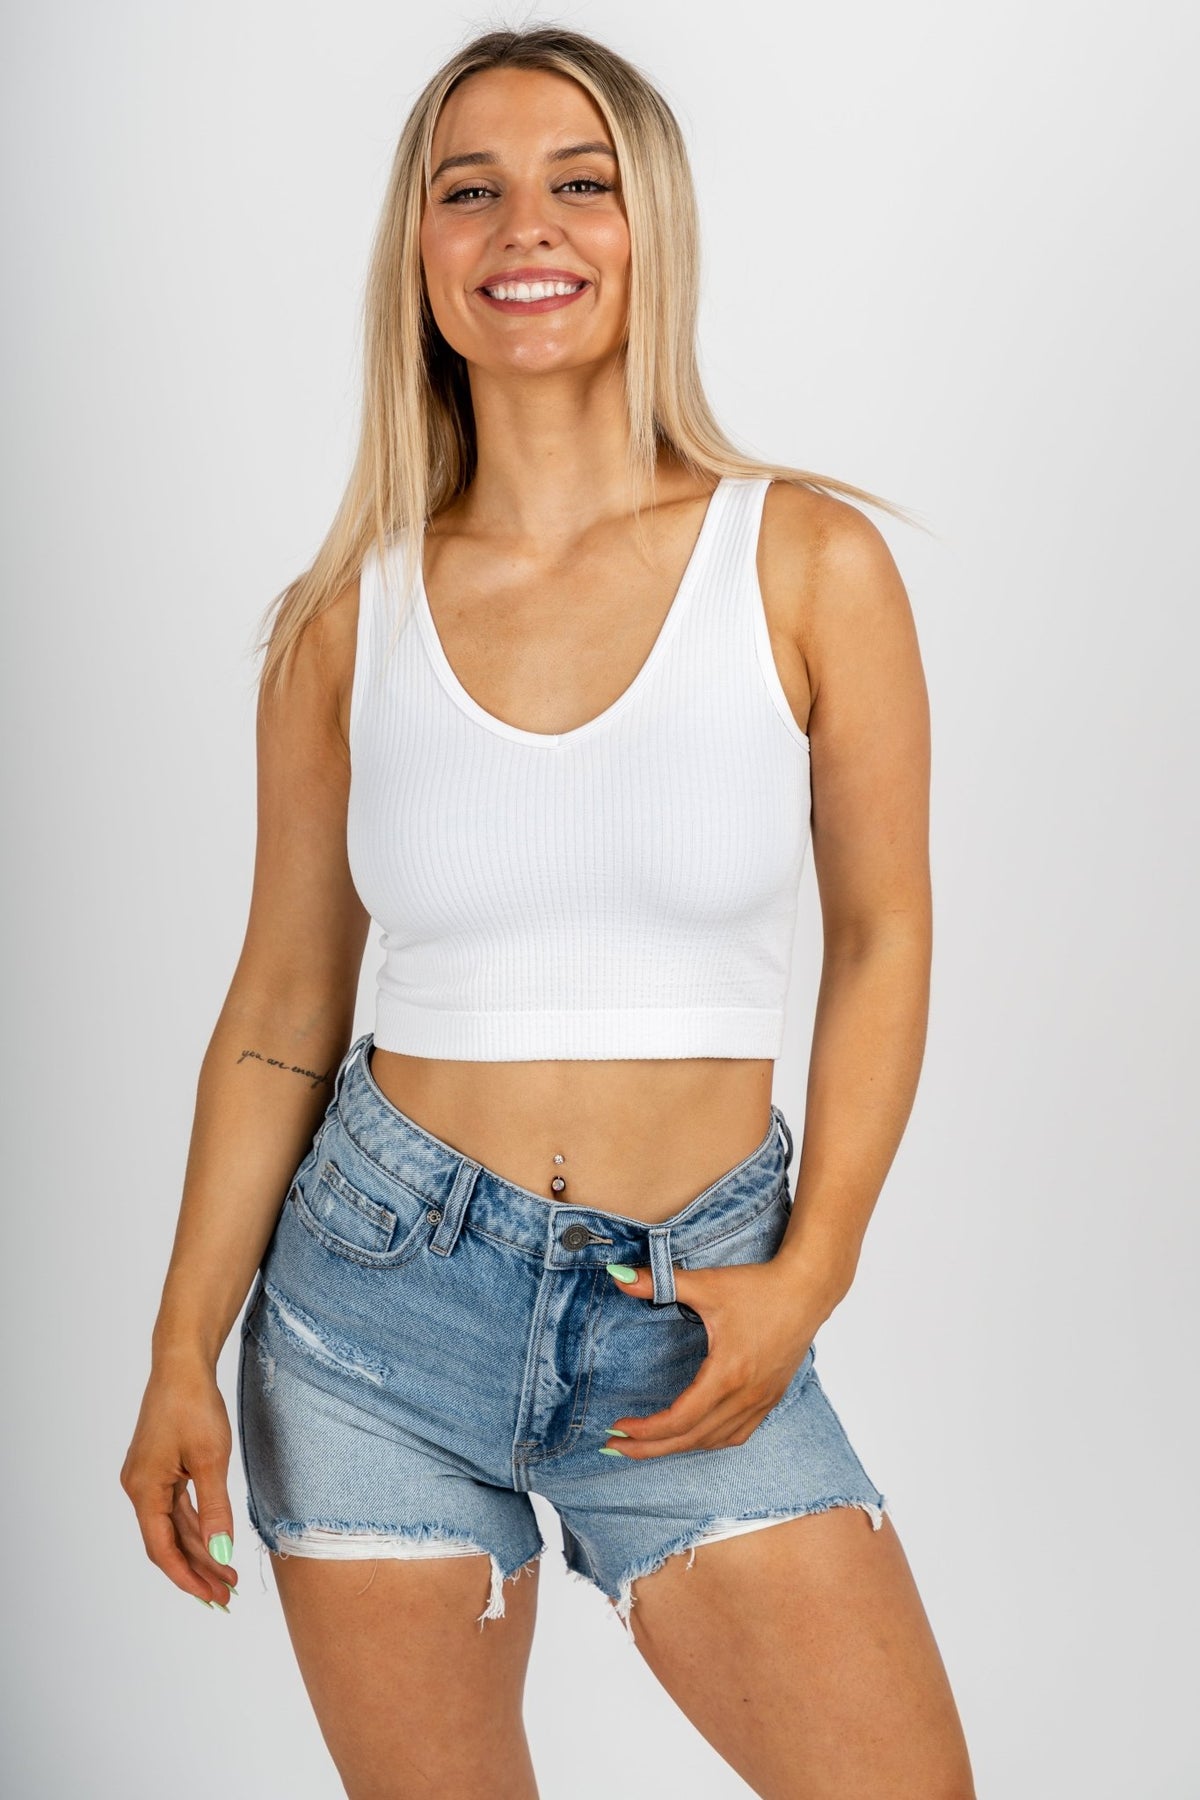 Z Supply seamless tank white - Z Supply Tank Top - Z Supply Tops, Dresses, Tanks, Tees, Cardigans, Joggers and Loungewear at Lush Fashion Lounge